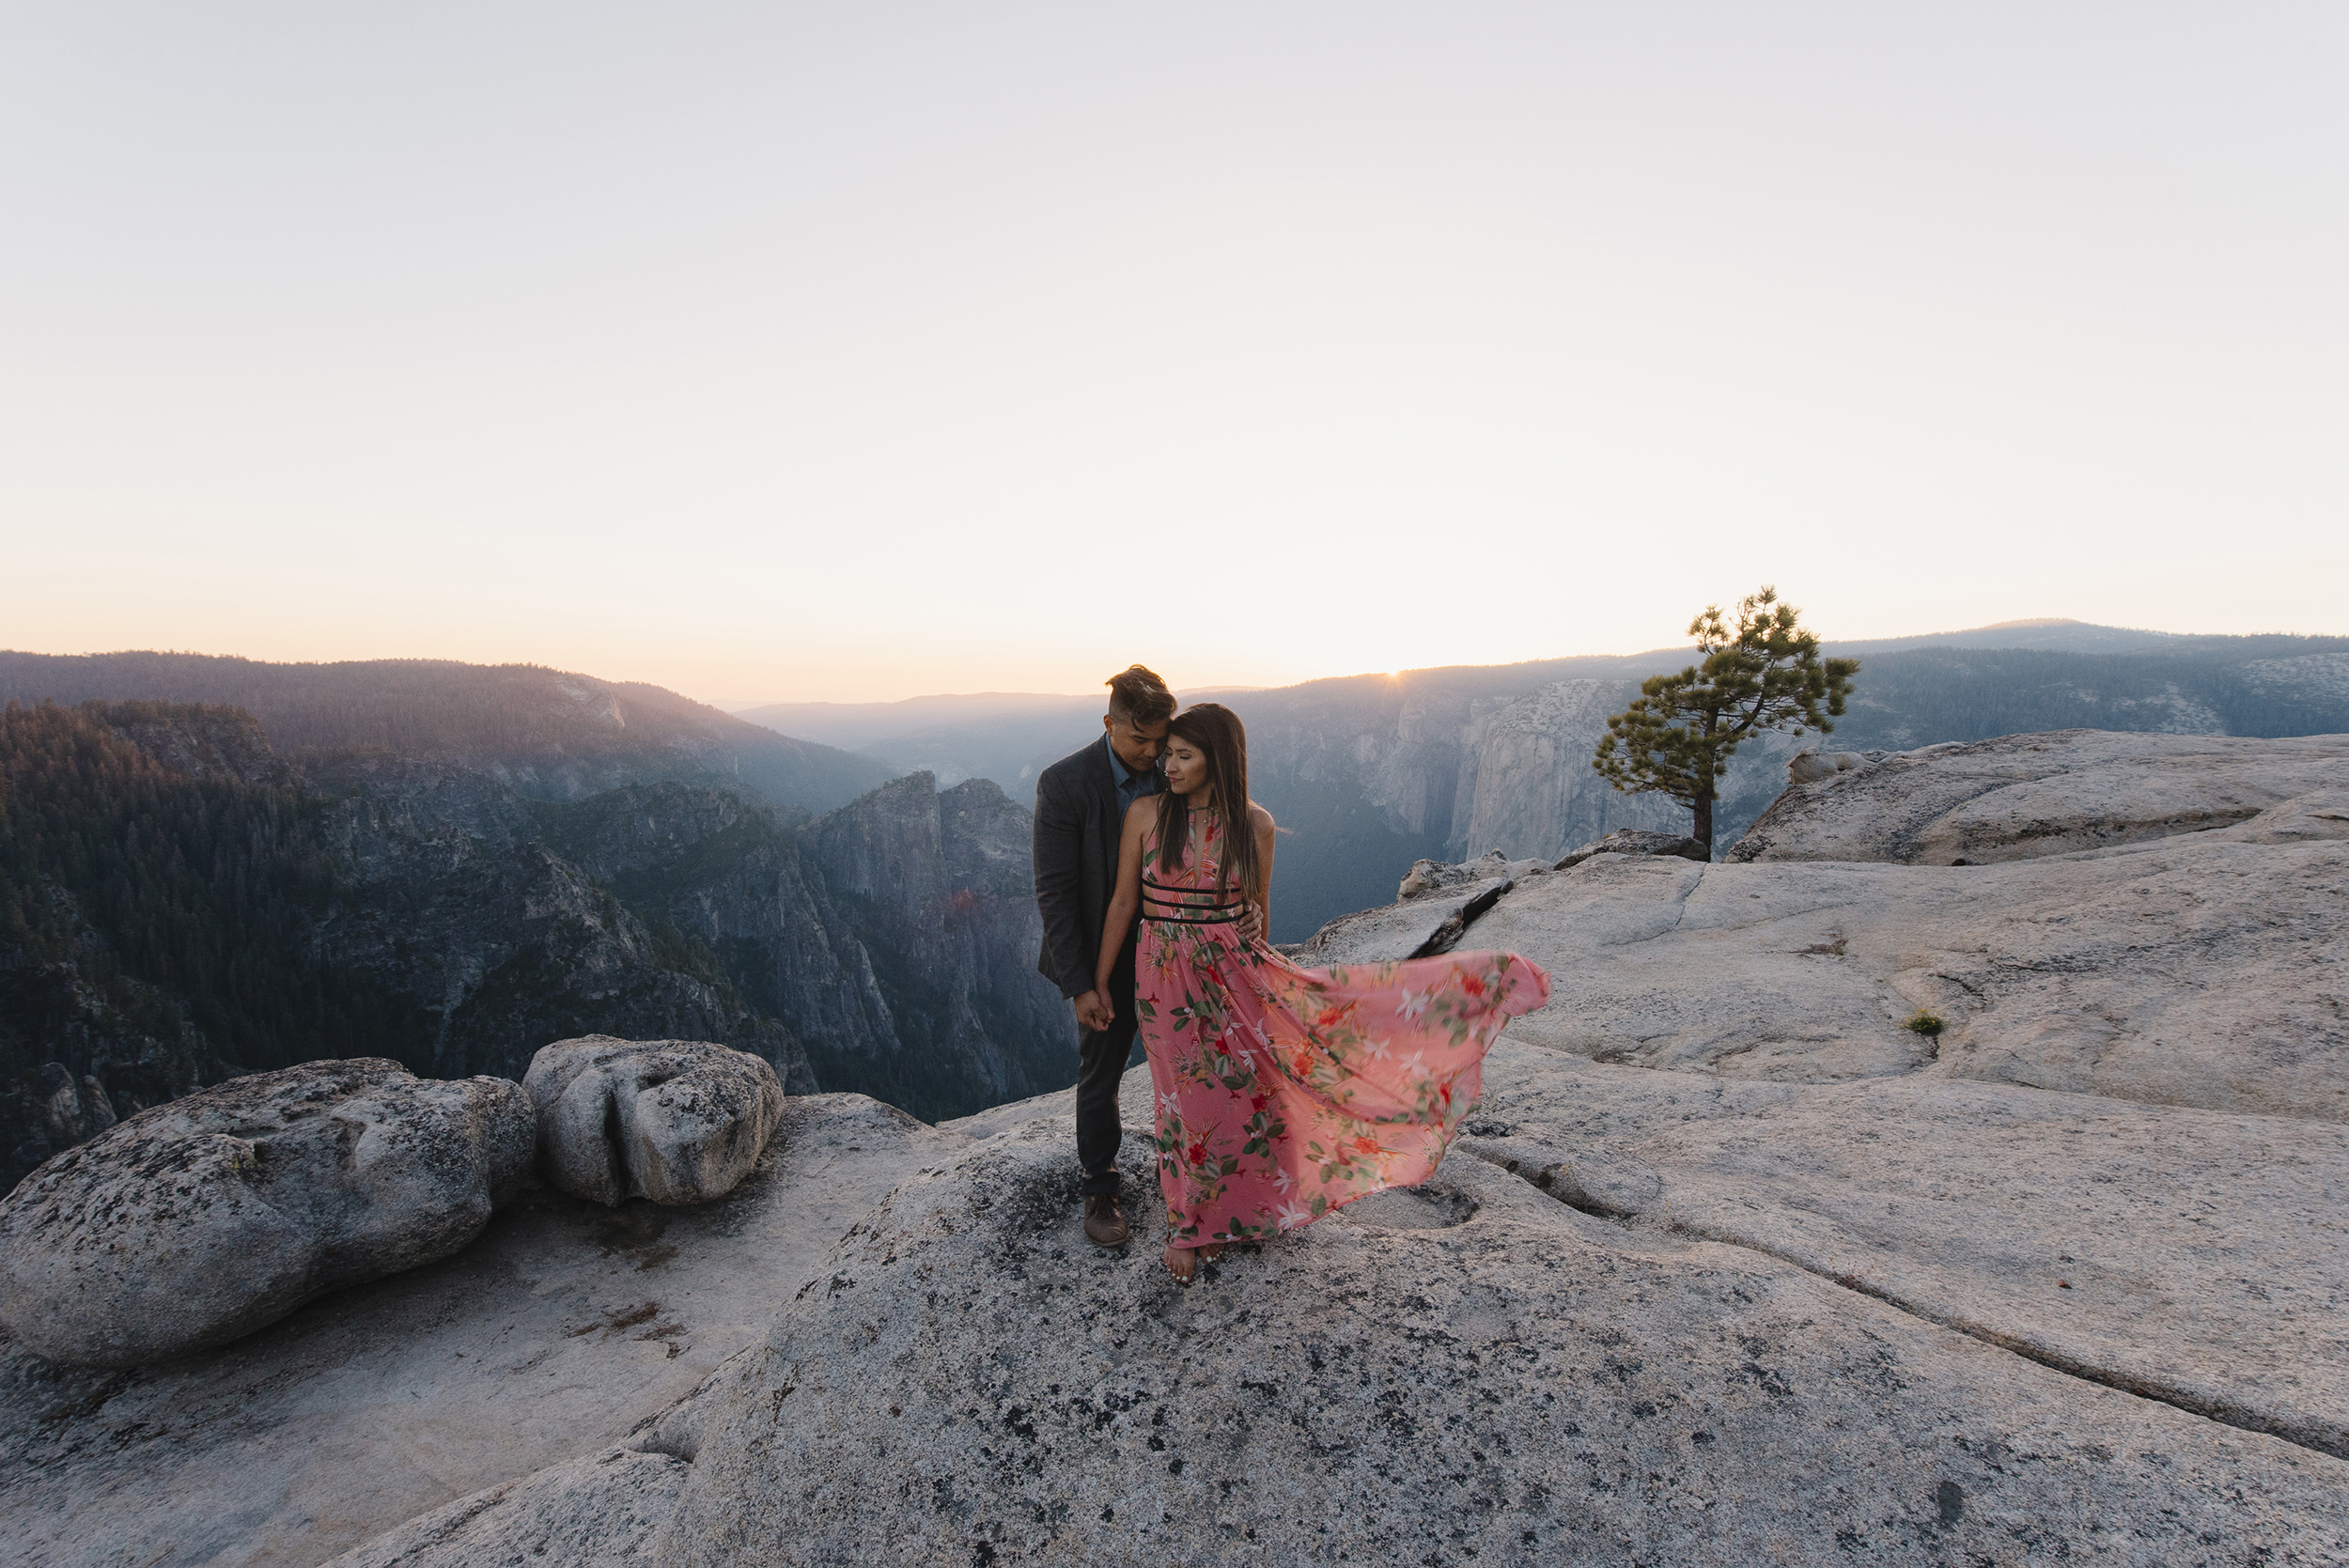 Bride to be's dress blows in the wind at sunset during their Taft Point Adventure photography session by Yosemite Wedding Photographers Colby and Jess colbyandjess.com